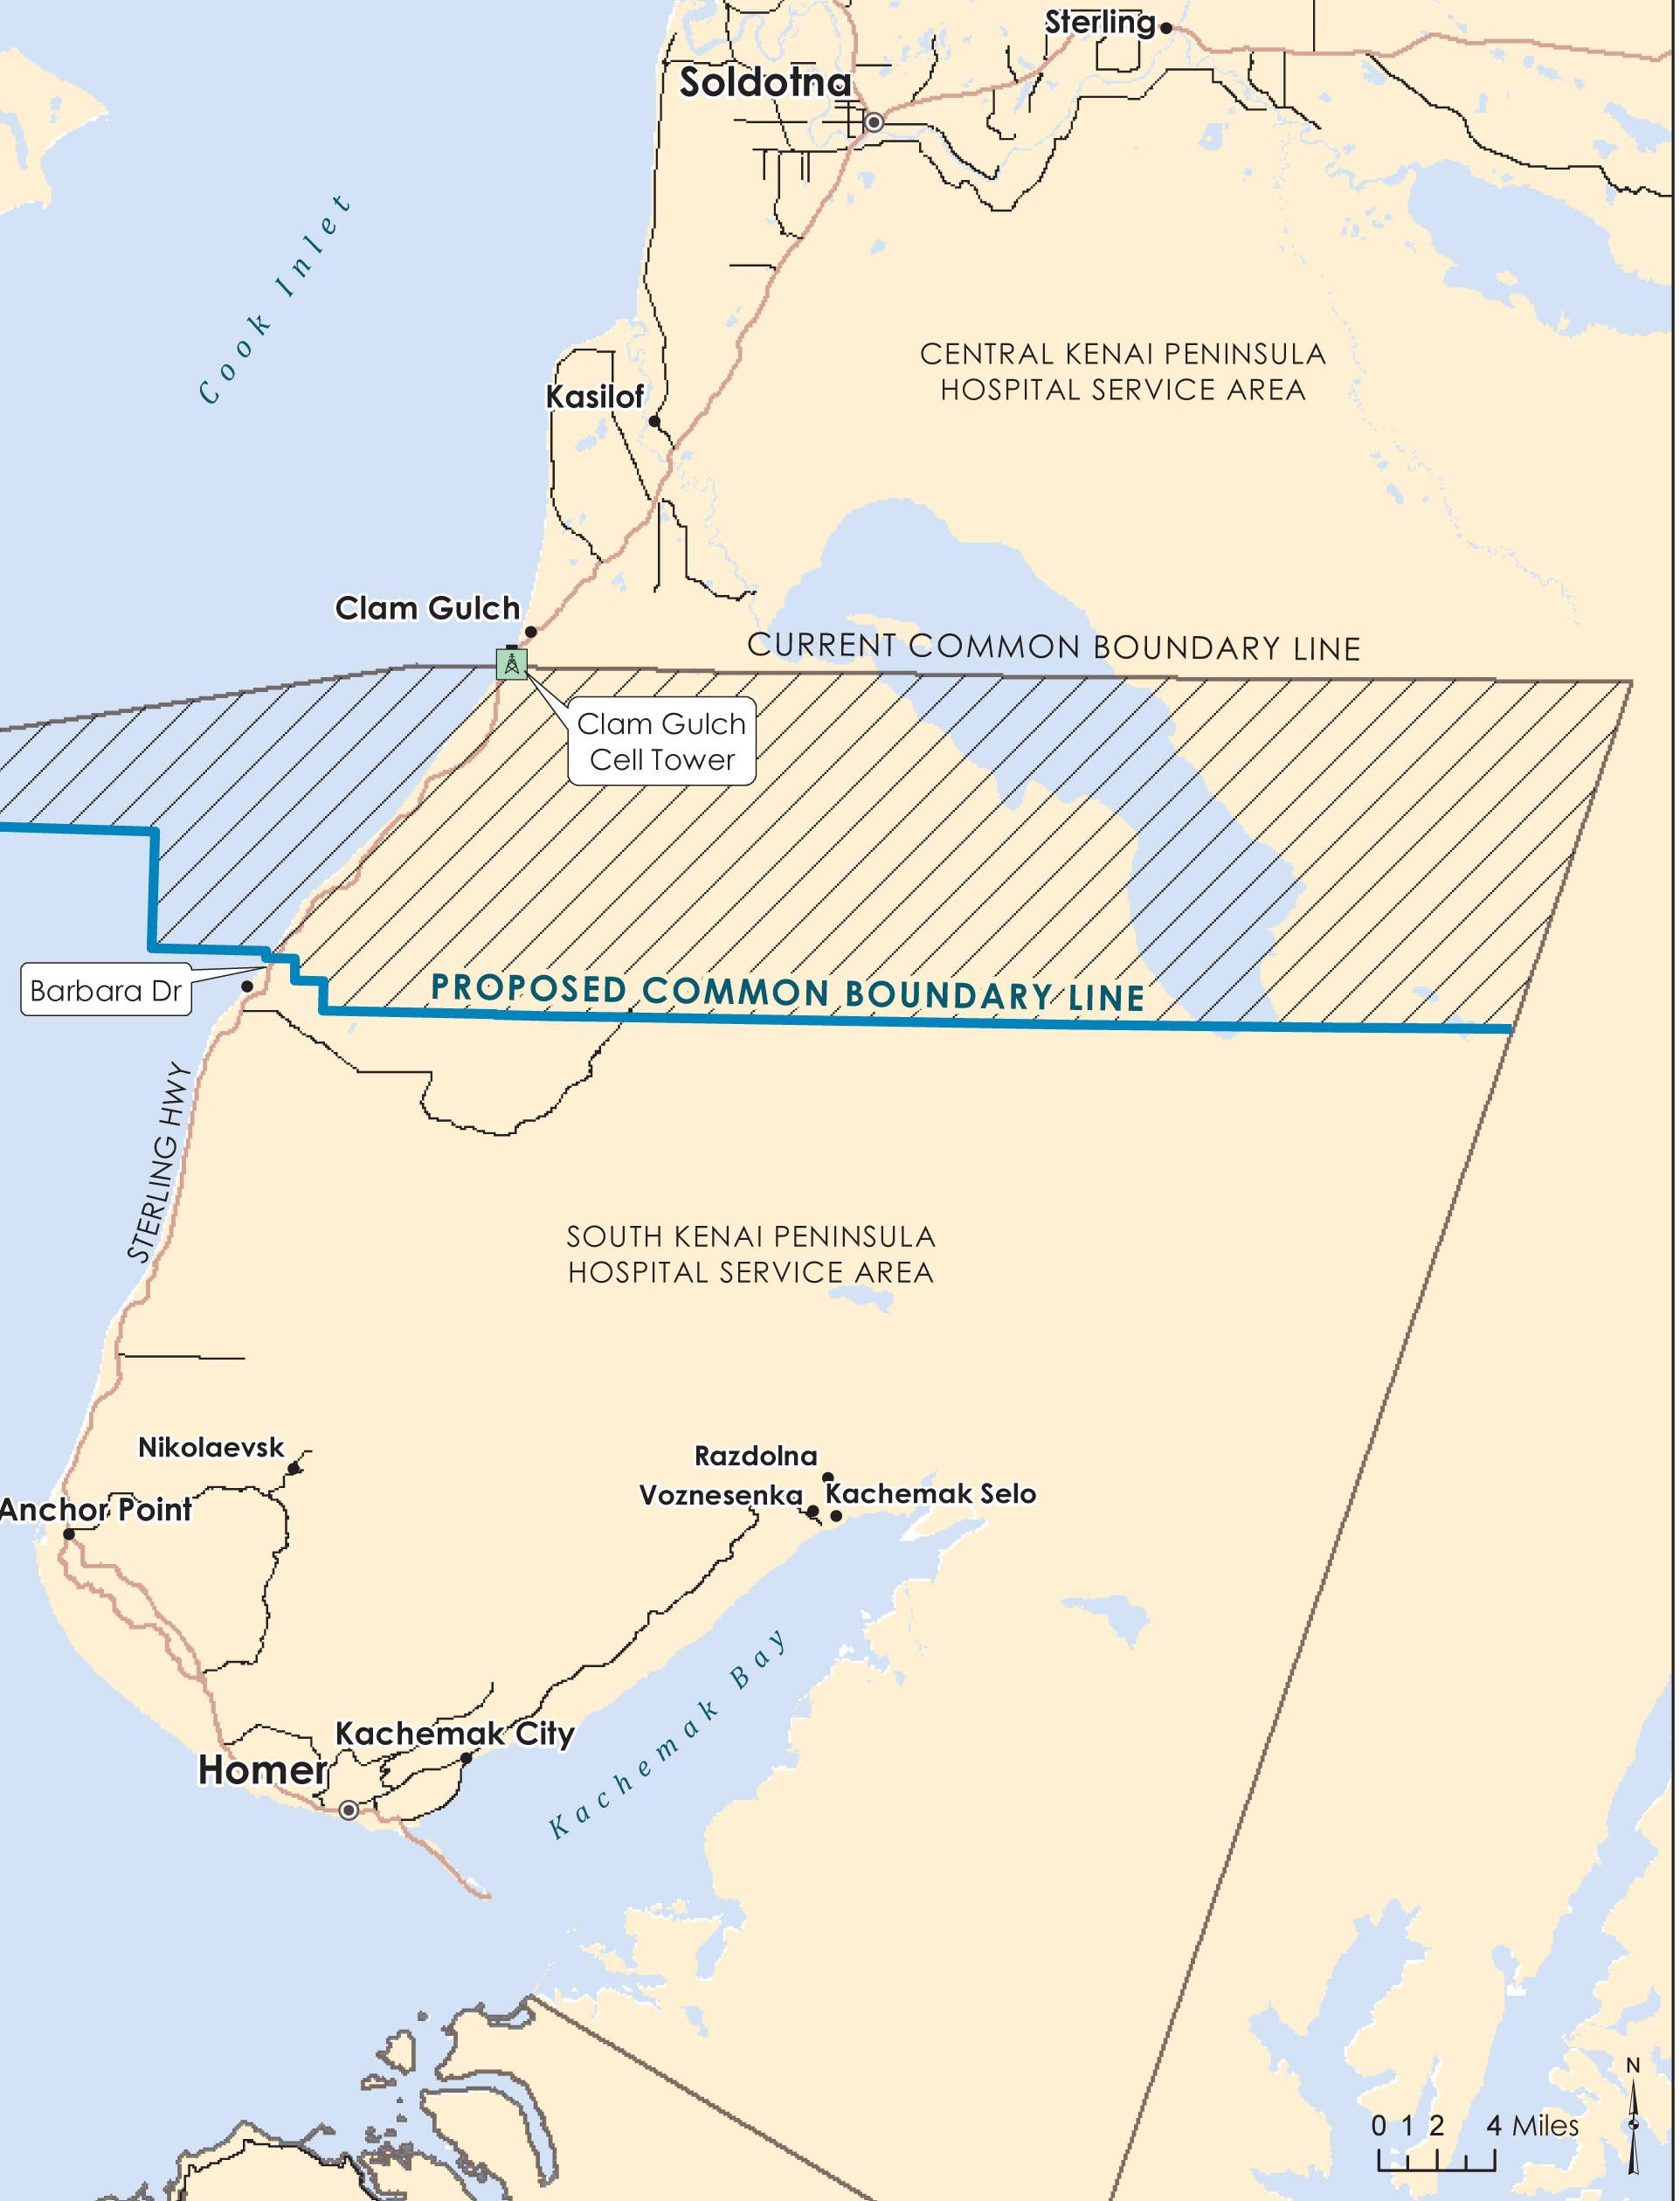 <span class="neFMT neFMT_PhotoCredit">Image courtesy Kenai Peninsula Borough</span>                                A map of the proposed boundary change in Proposition 2. The shaded area shows the boundary move and the new area to be included in the Central Kenai Peninsula Hospital Service Area.